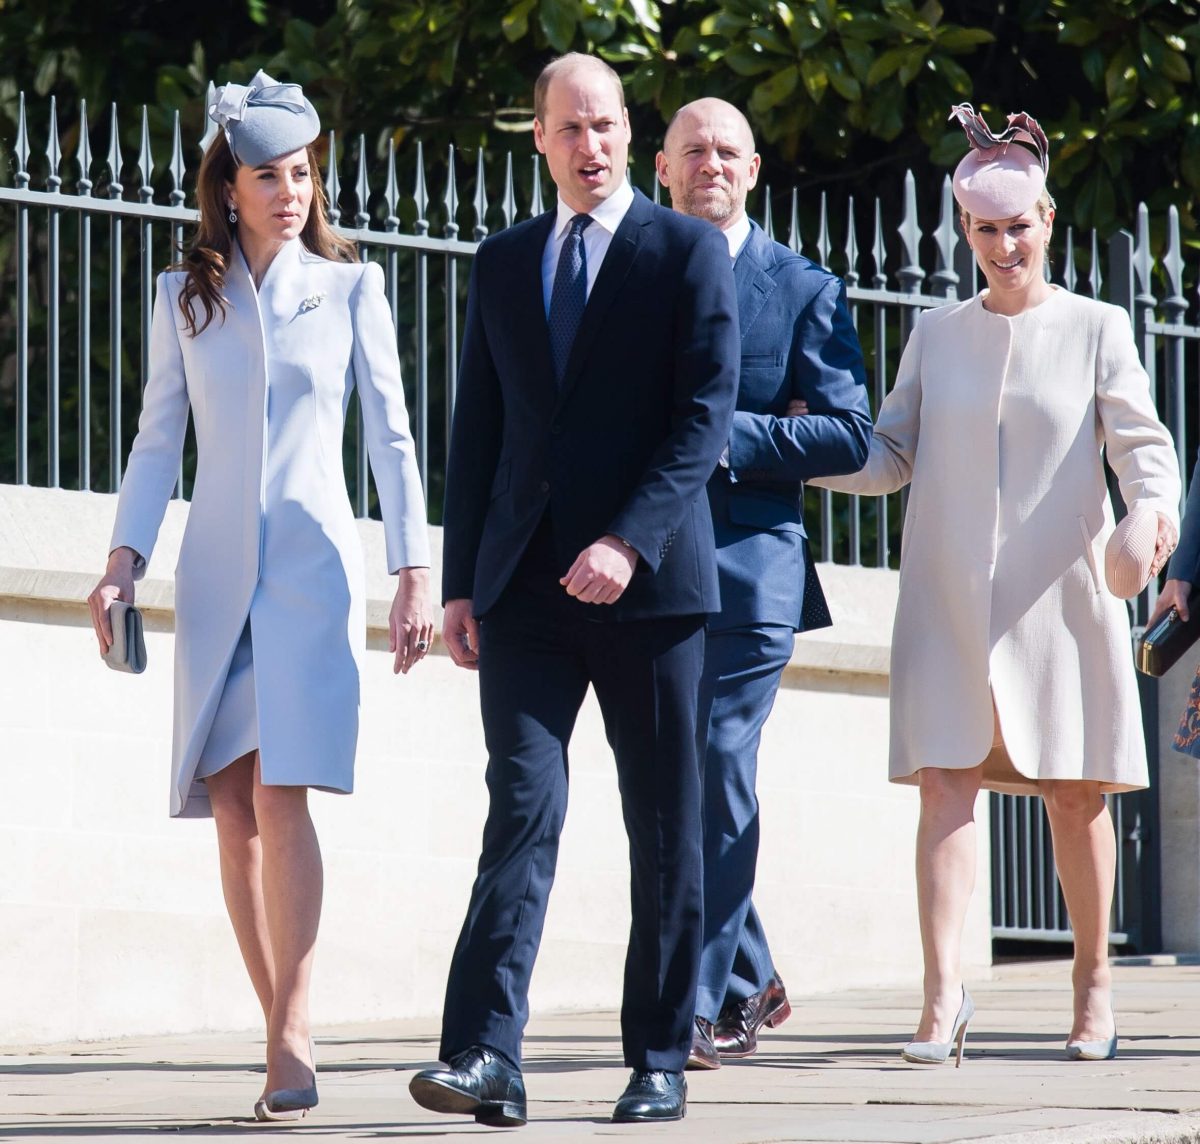 Kate Middleton, Prince William, Mike Tindall, and Zara Tindall attend Easter Sunday service